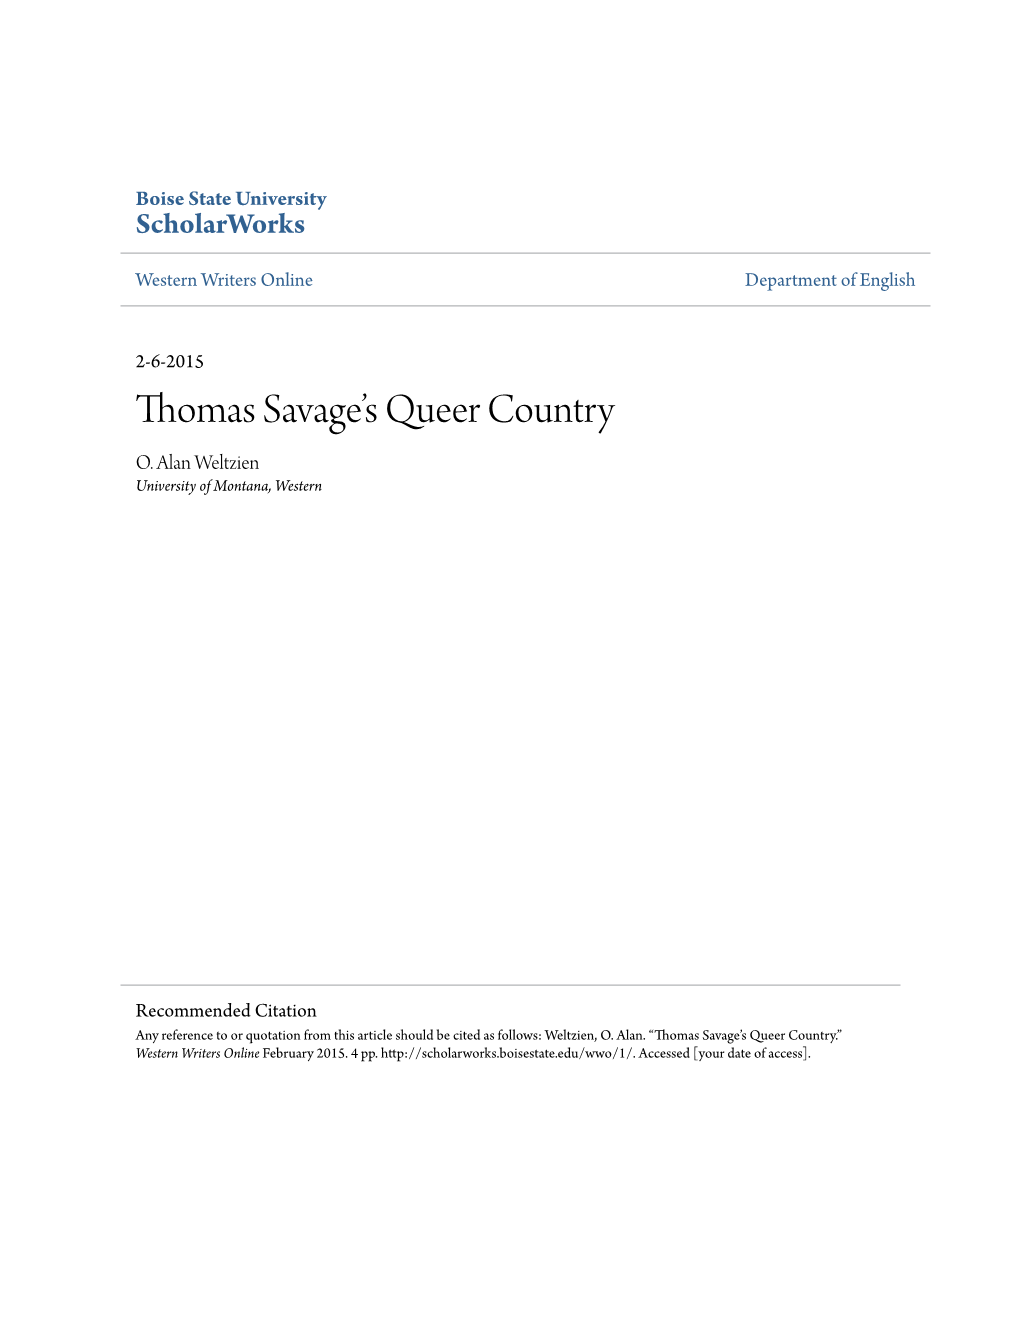 Thomas Savage's Queer Country